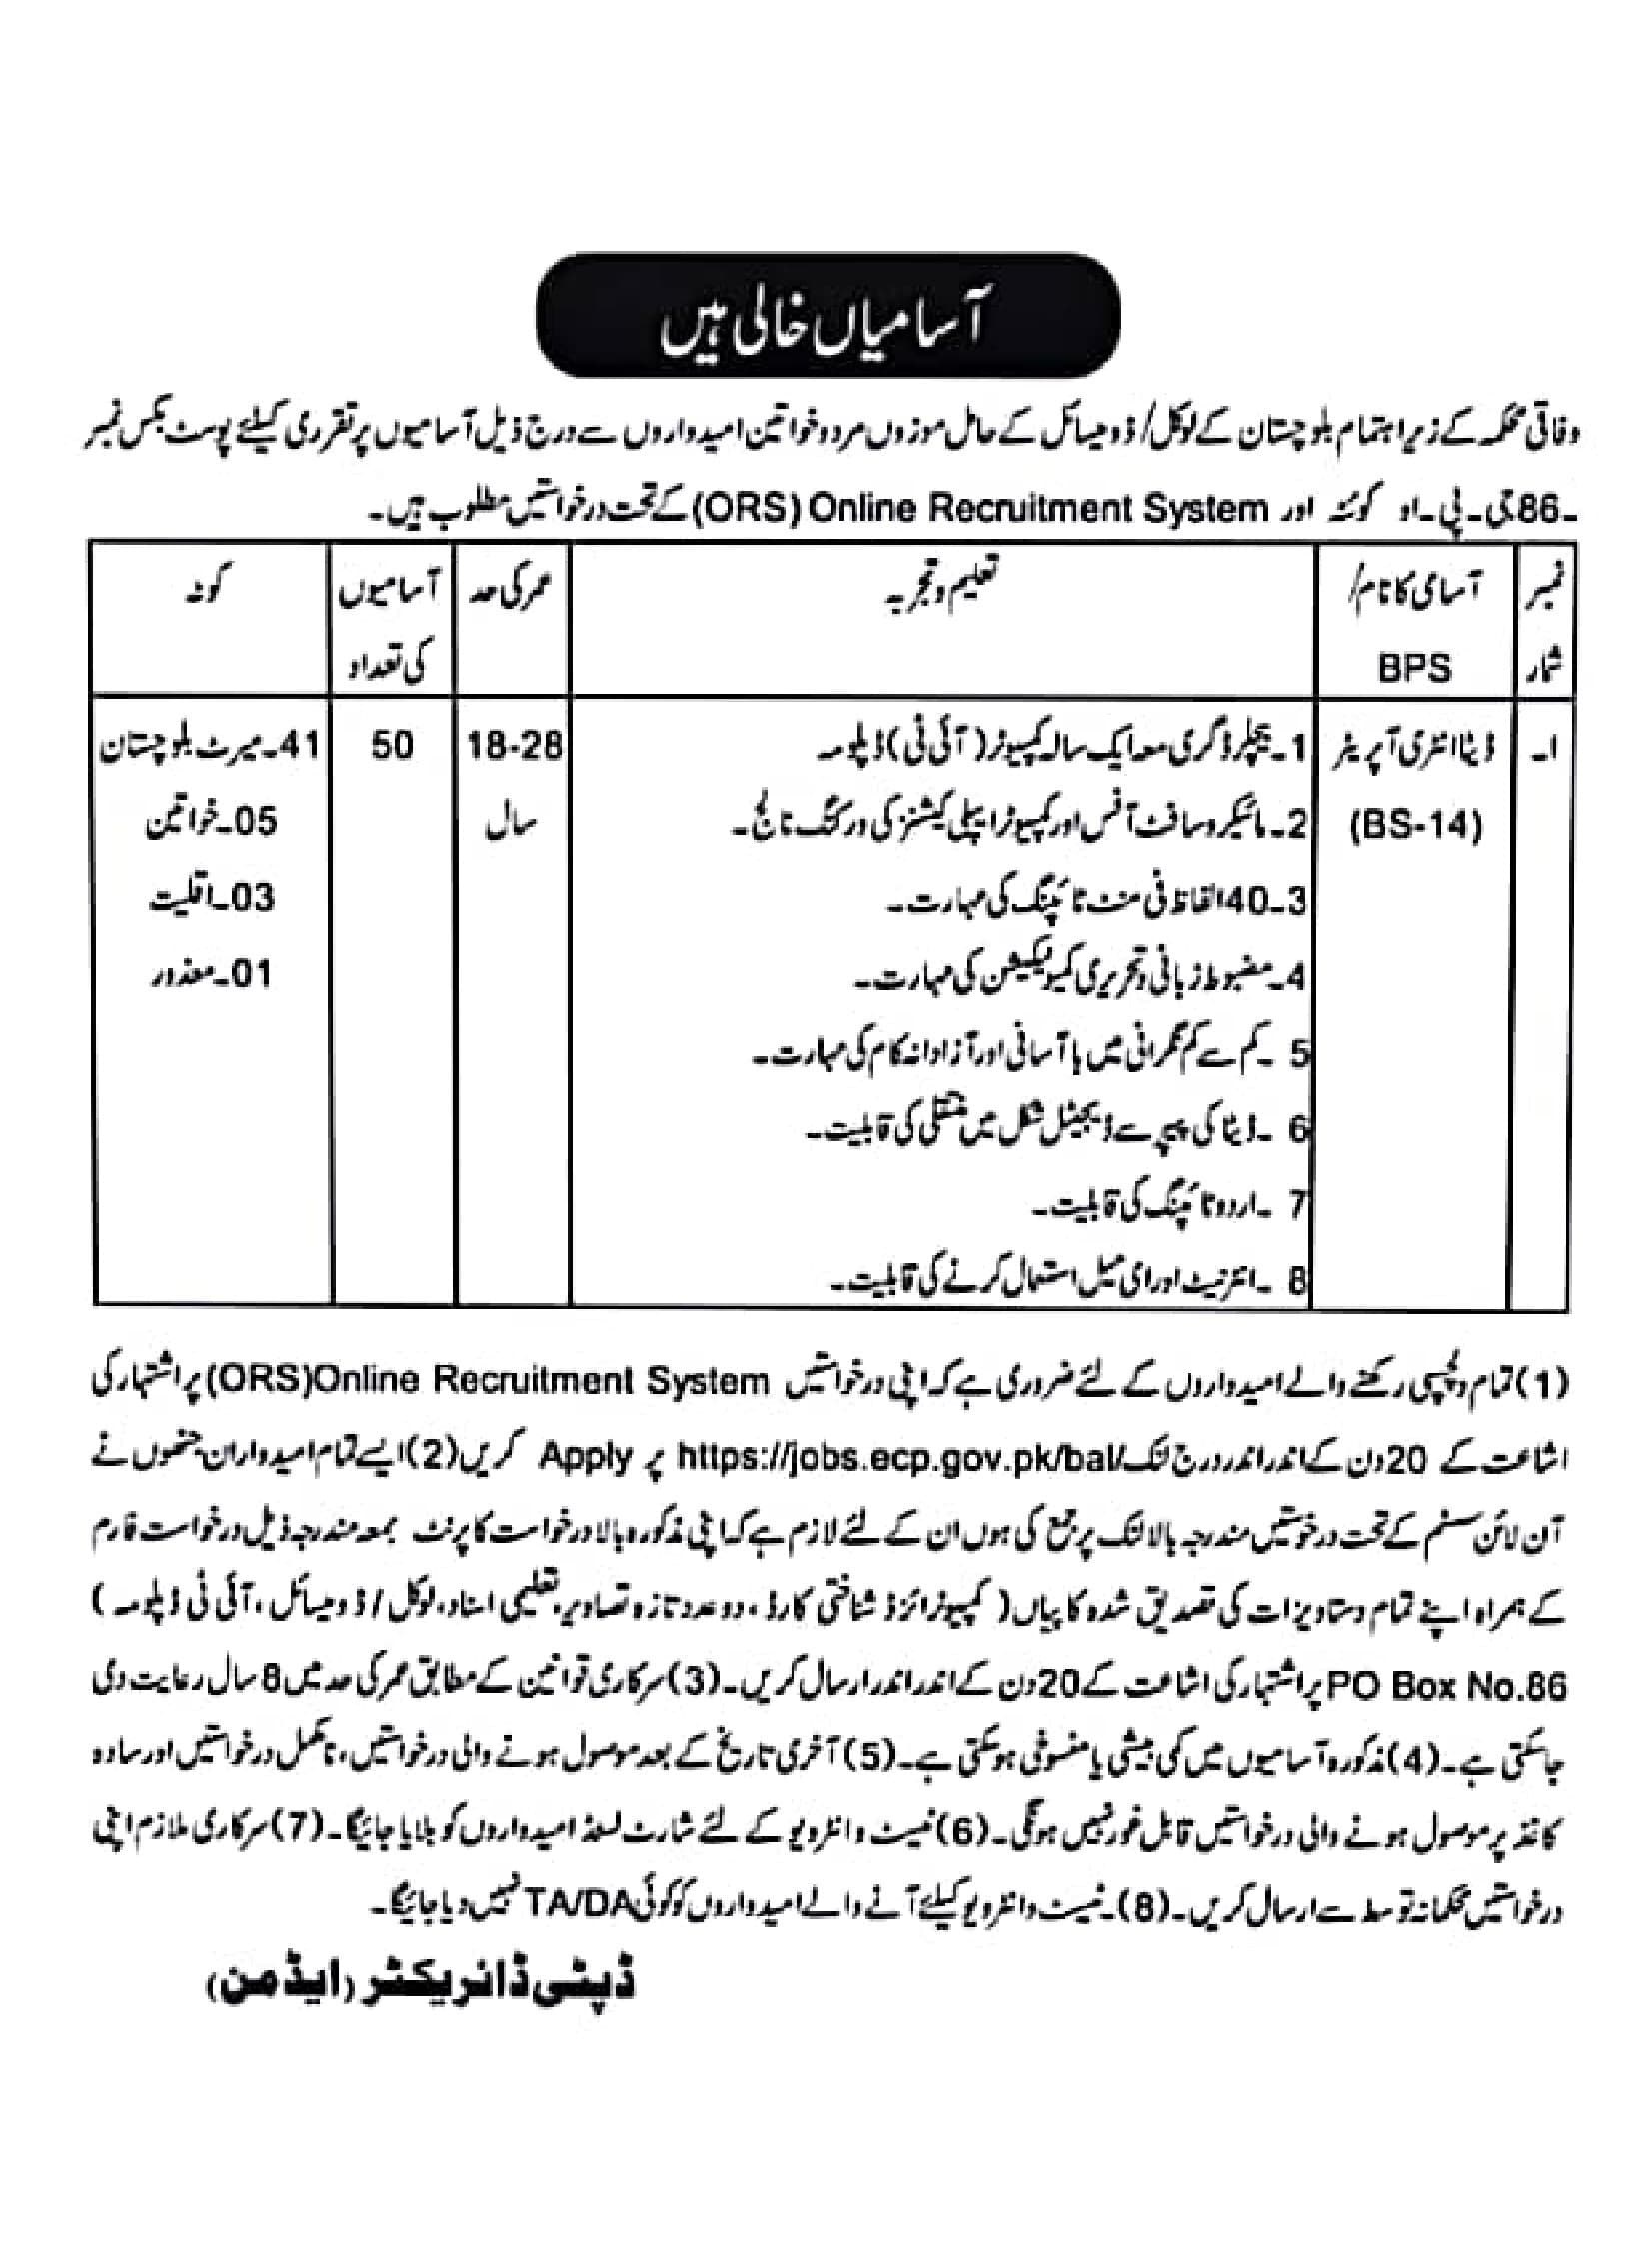 BS-14 Data Entry Operator Jobs In Federal Government